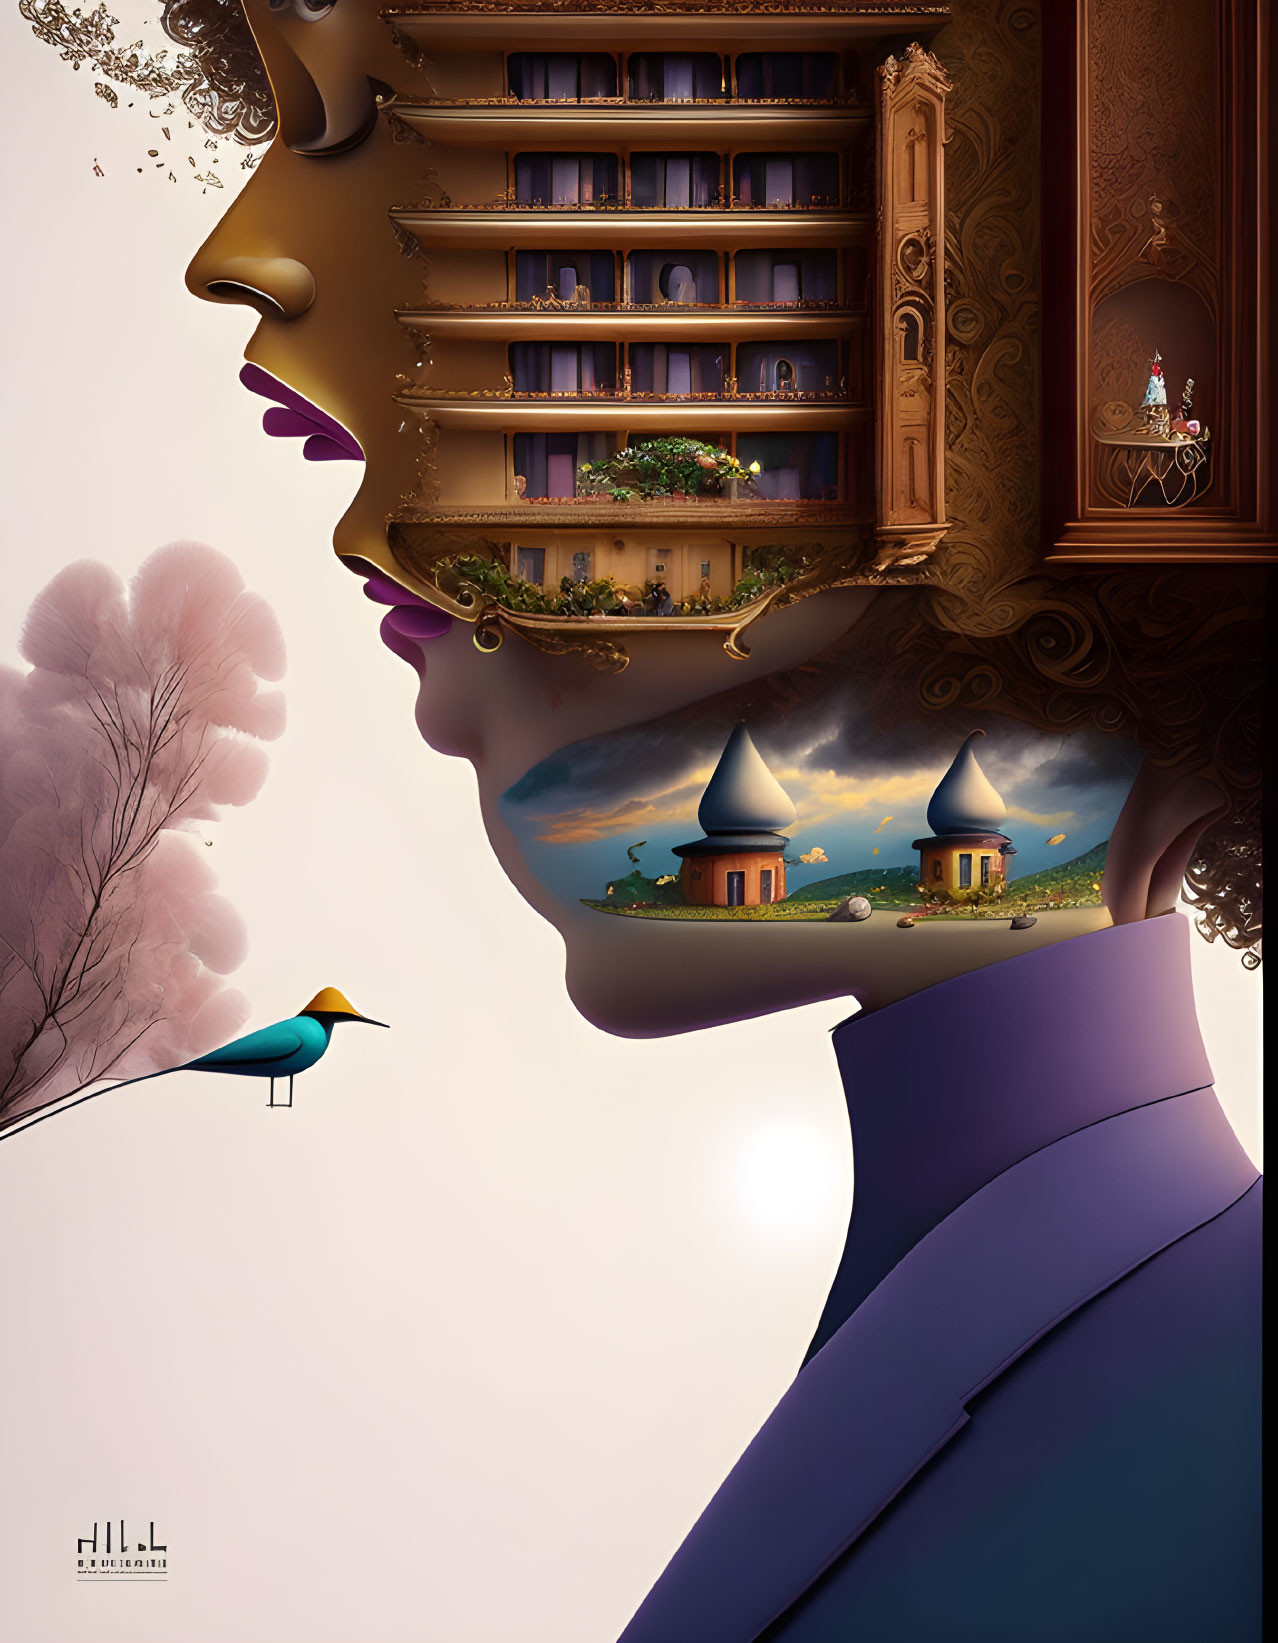 Surreal landscape and woman's profile with bookcase, castles, and bird